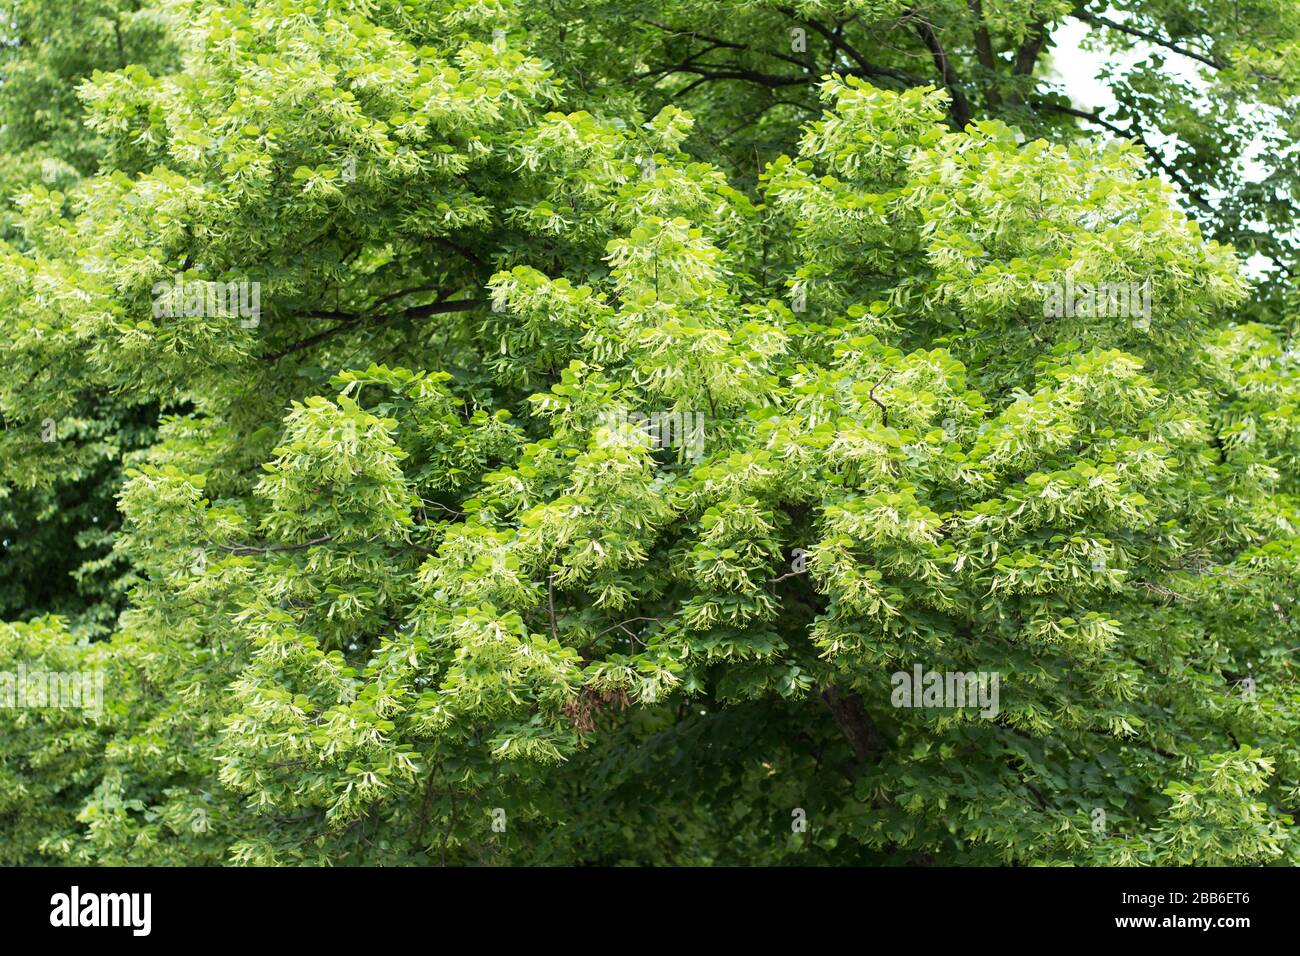 Lush greenery of linden tree in spring Stock Photo